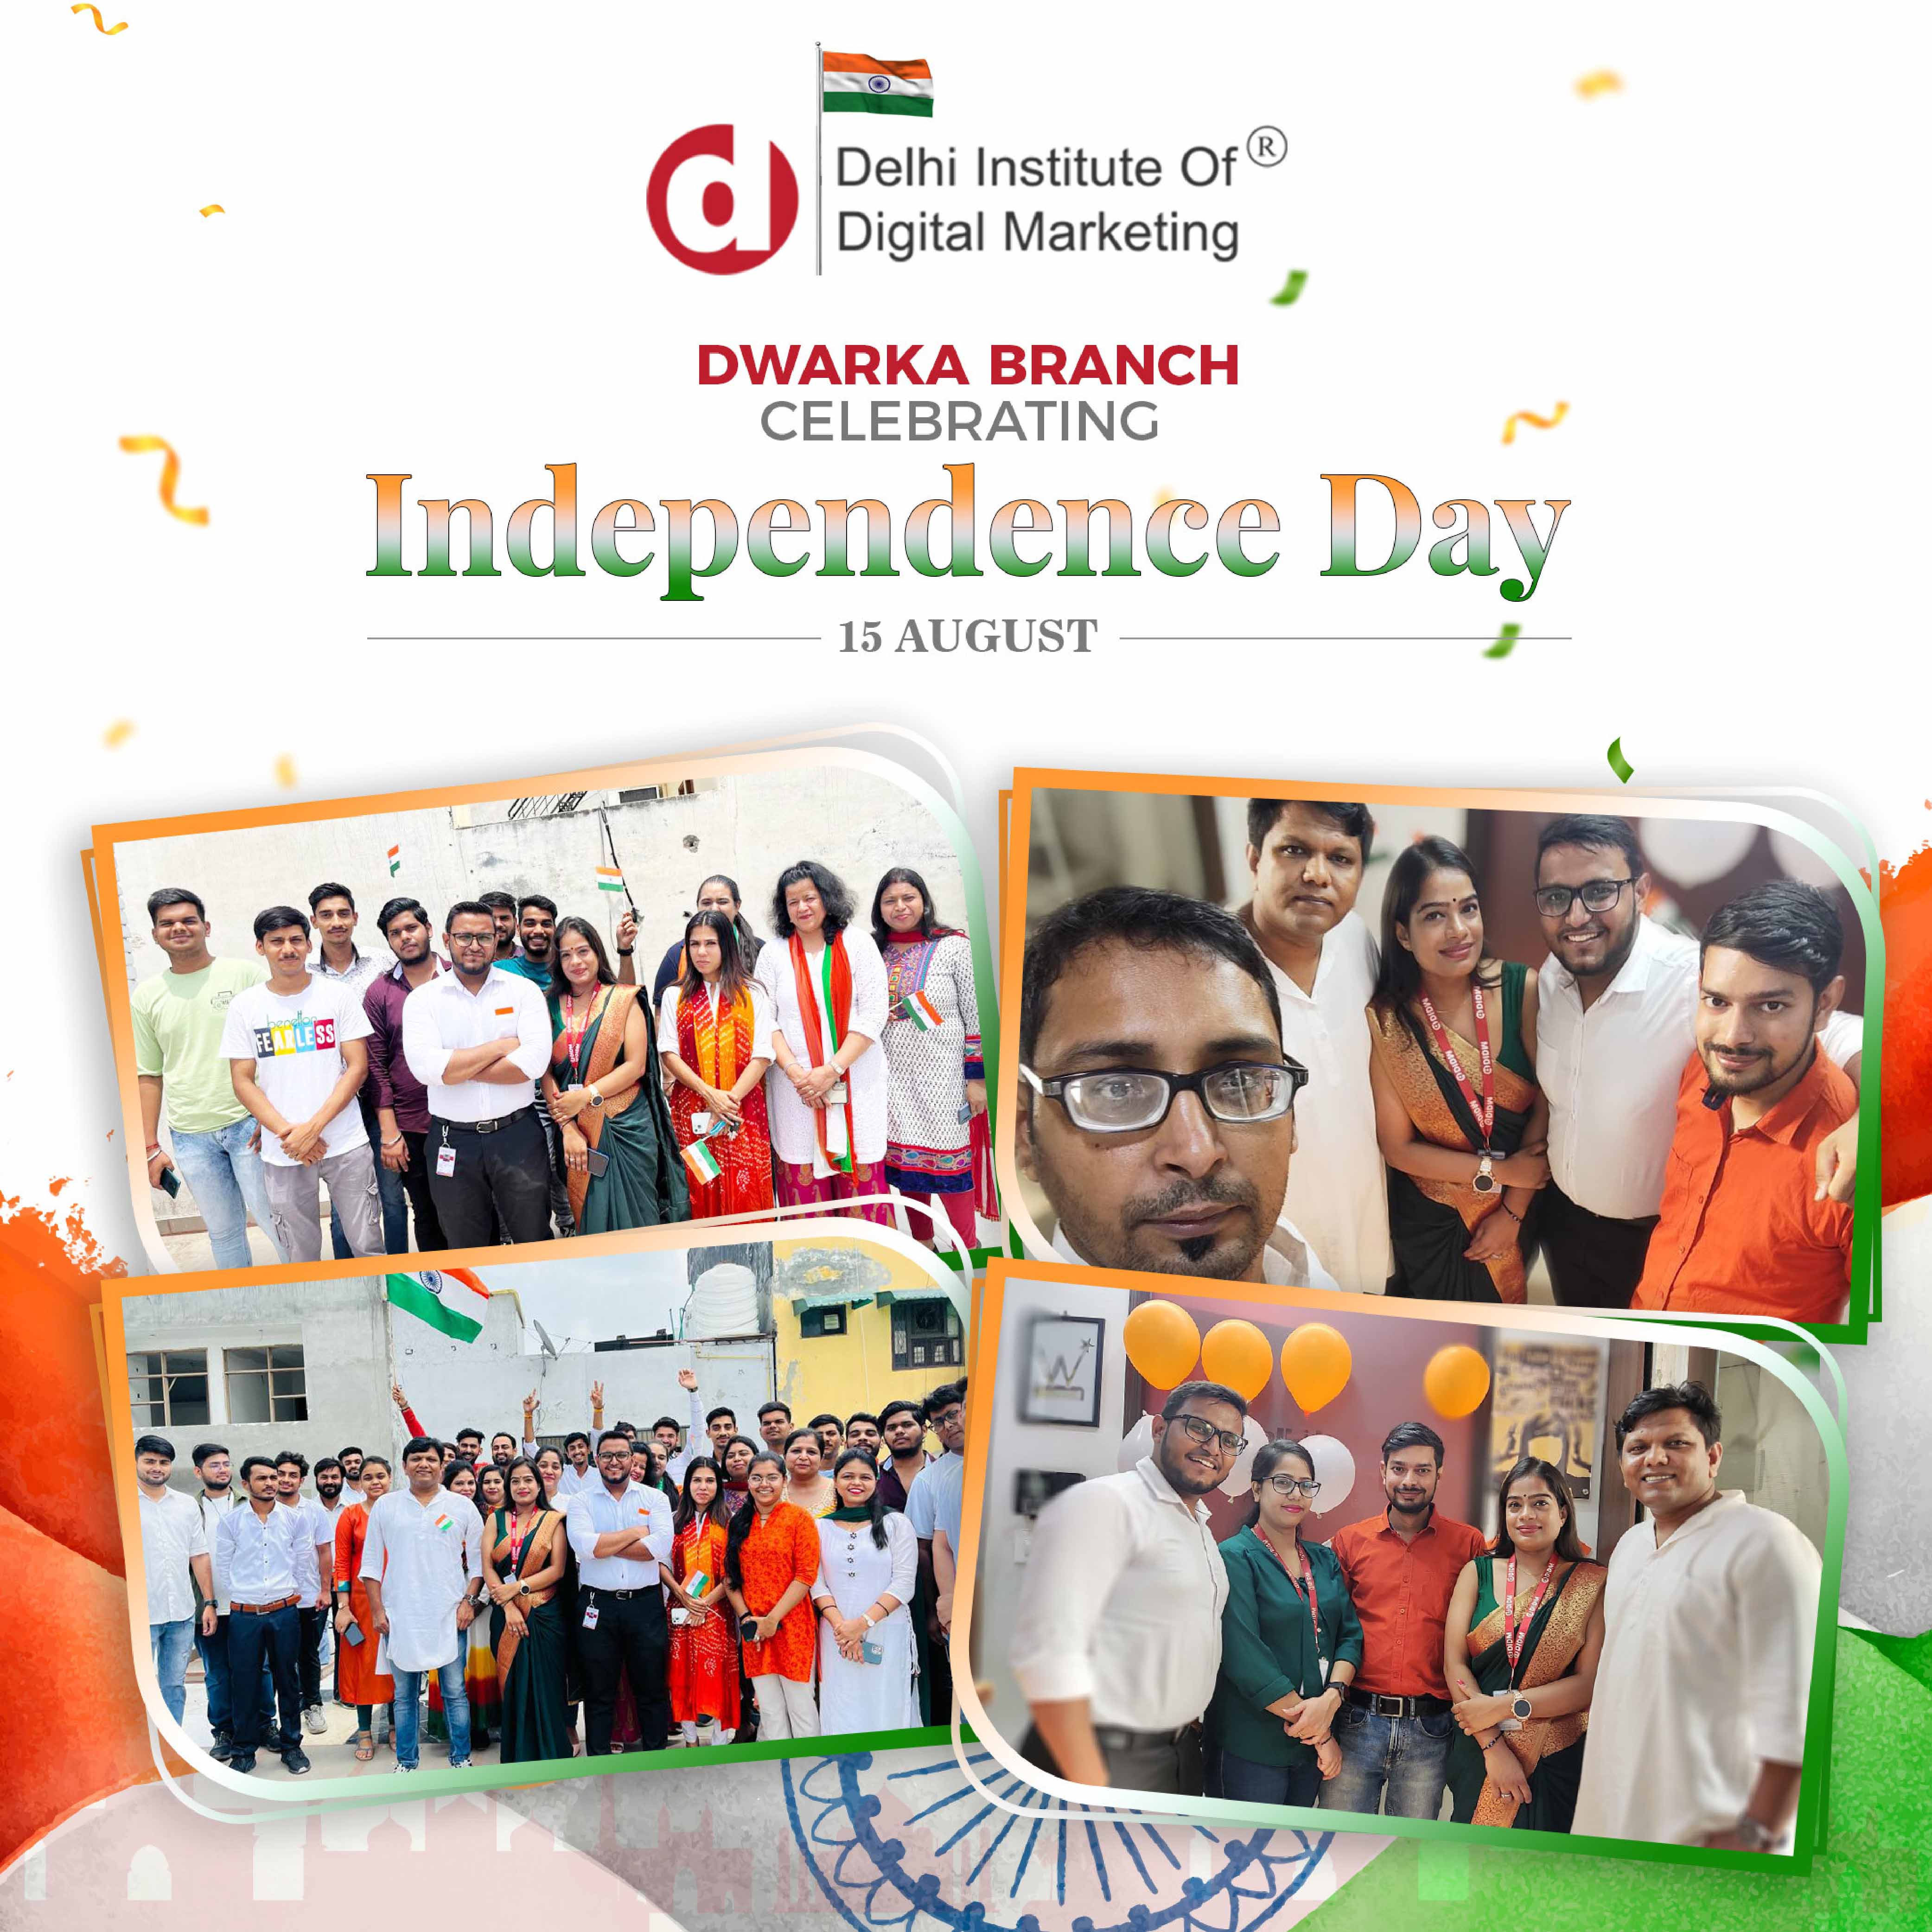 DIDM Dwarka Branch is celebrating its 77th Independence Day